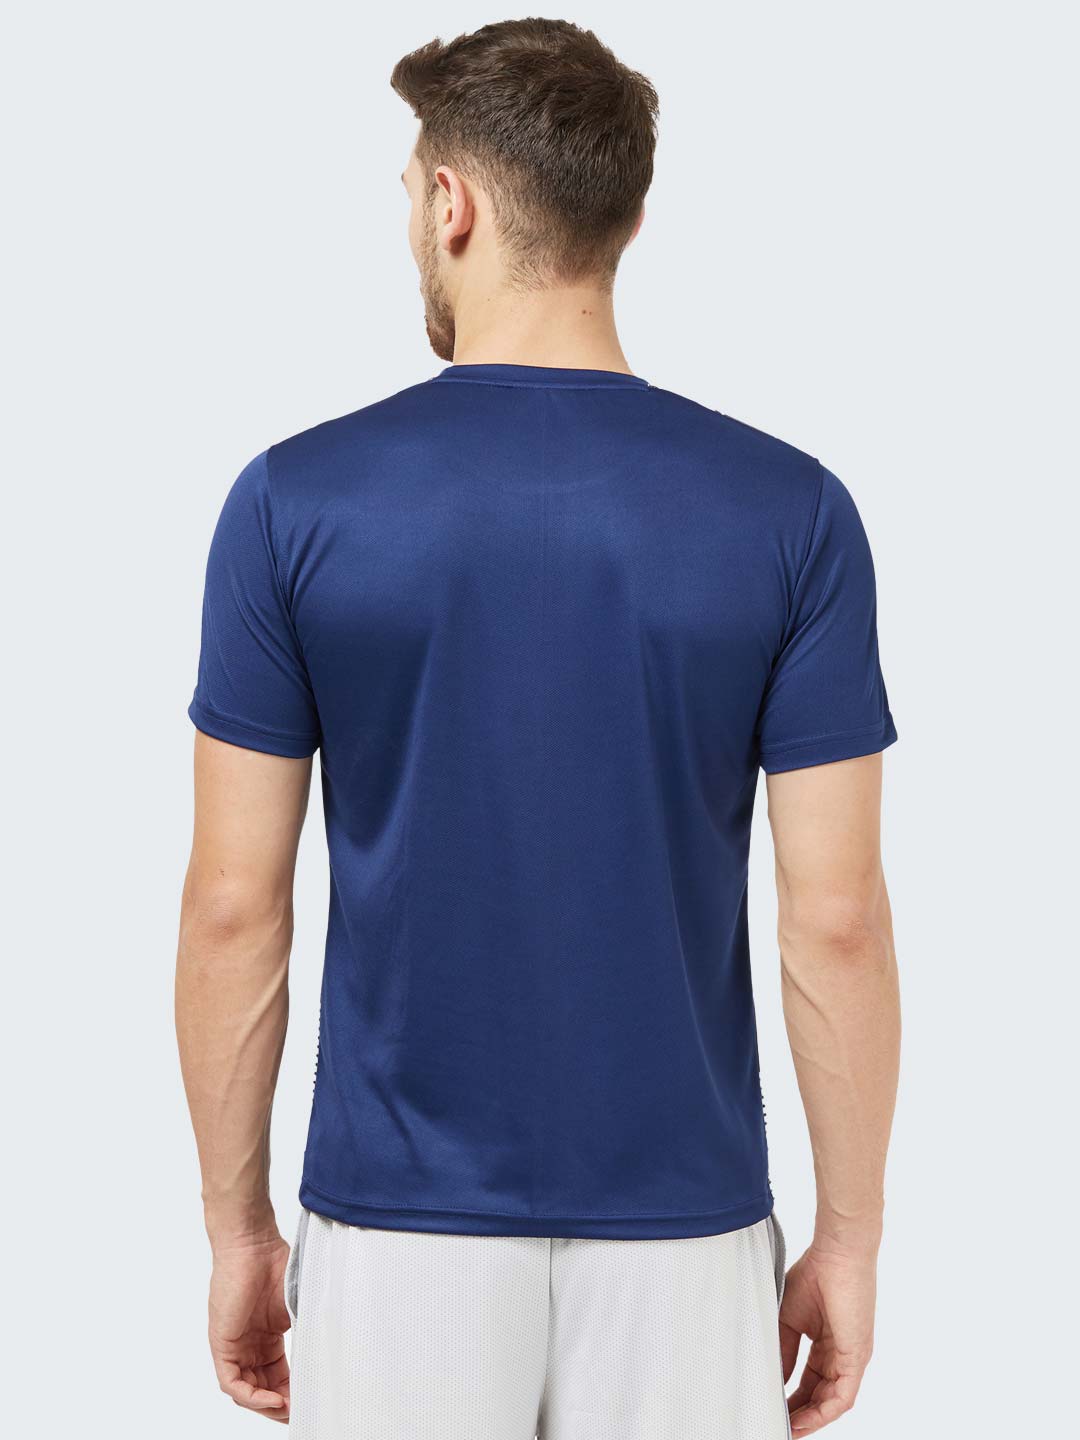 Men's Camouflage Active Sports T-Shirt: Navy Blue - Front